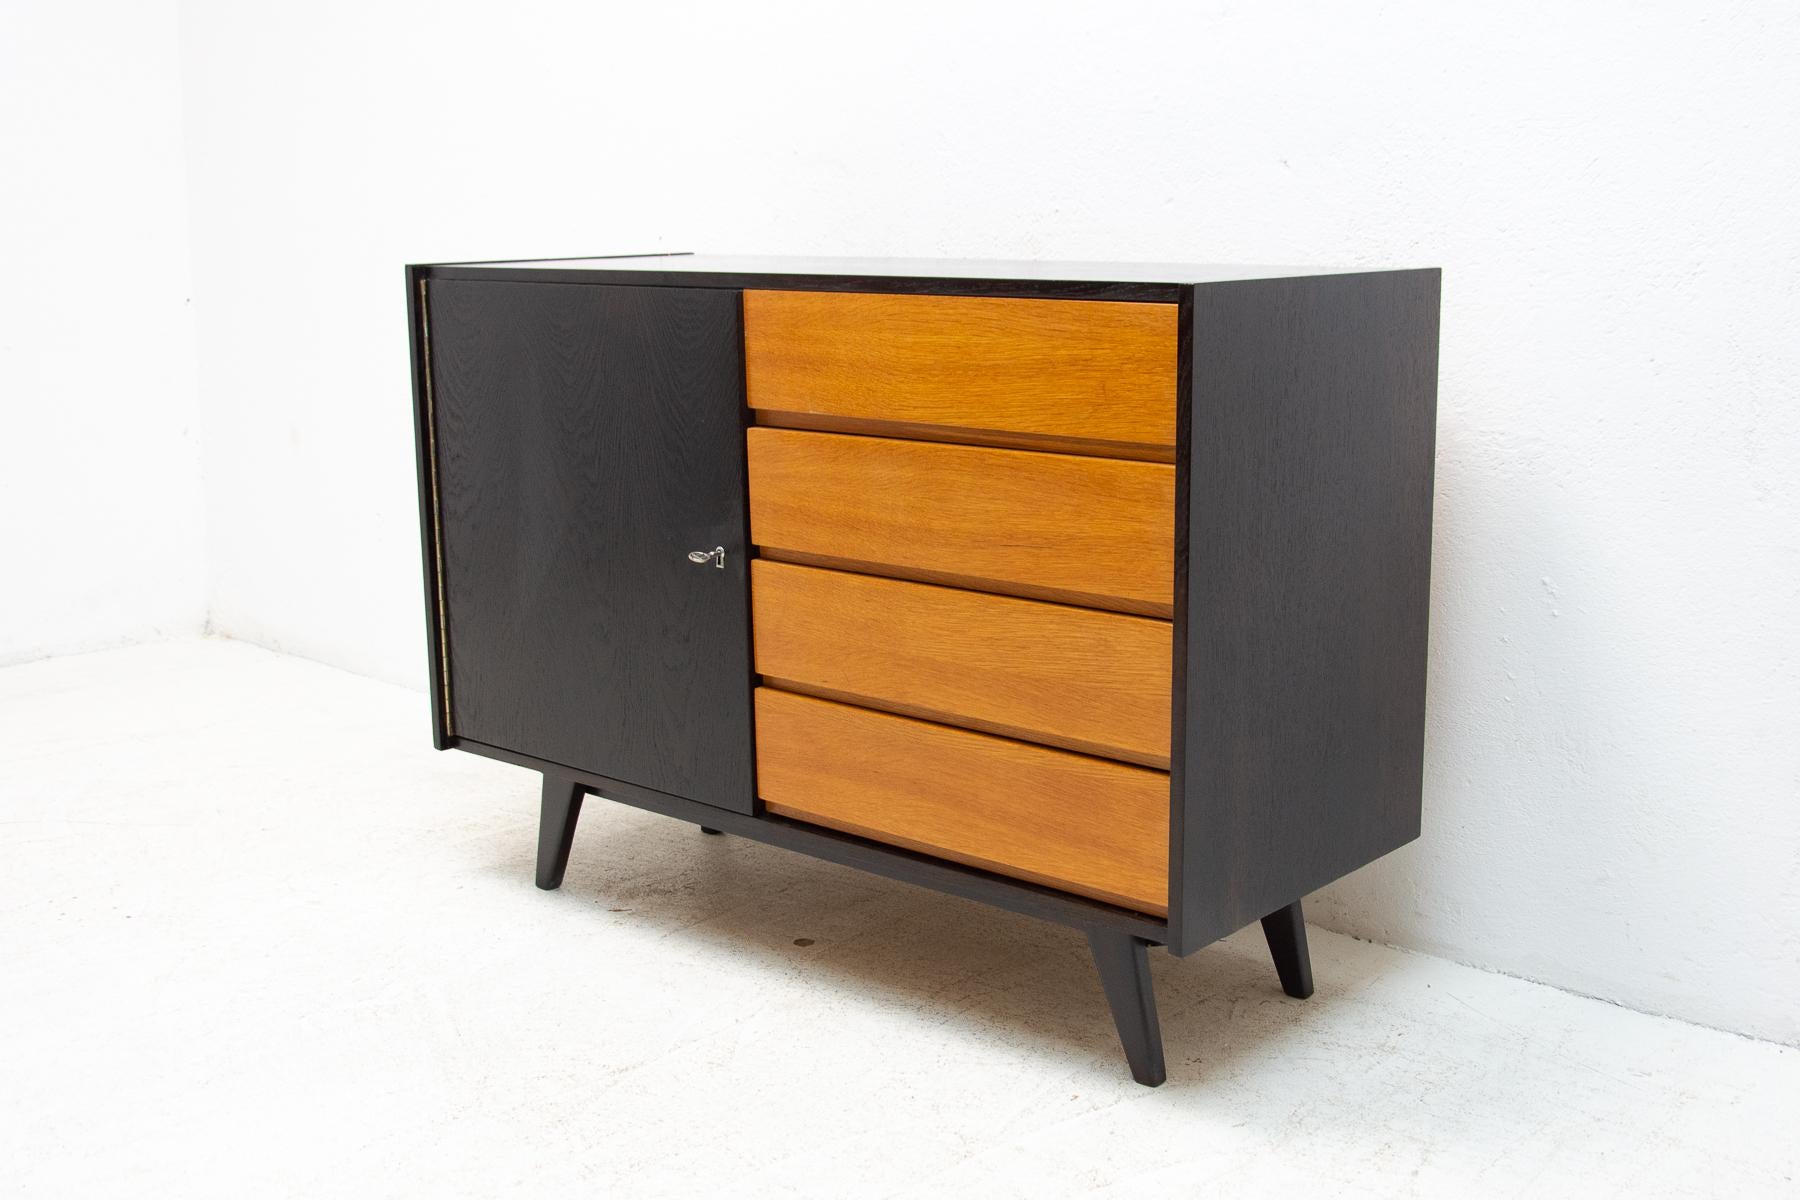 Mid-century chest of drawers, model no. U-458, designed by Jiri Jiroutek. It was made in the 1960´s and produced by “Interier Praha”. This model associated with world-renowned EXPO 58-“Brussels period”. It features Beech wood, plywood, veneered